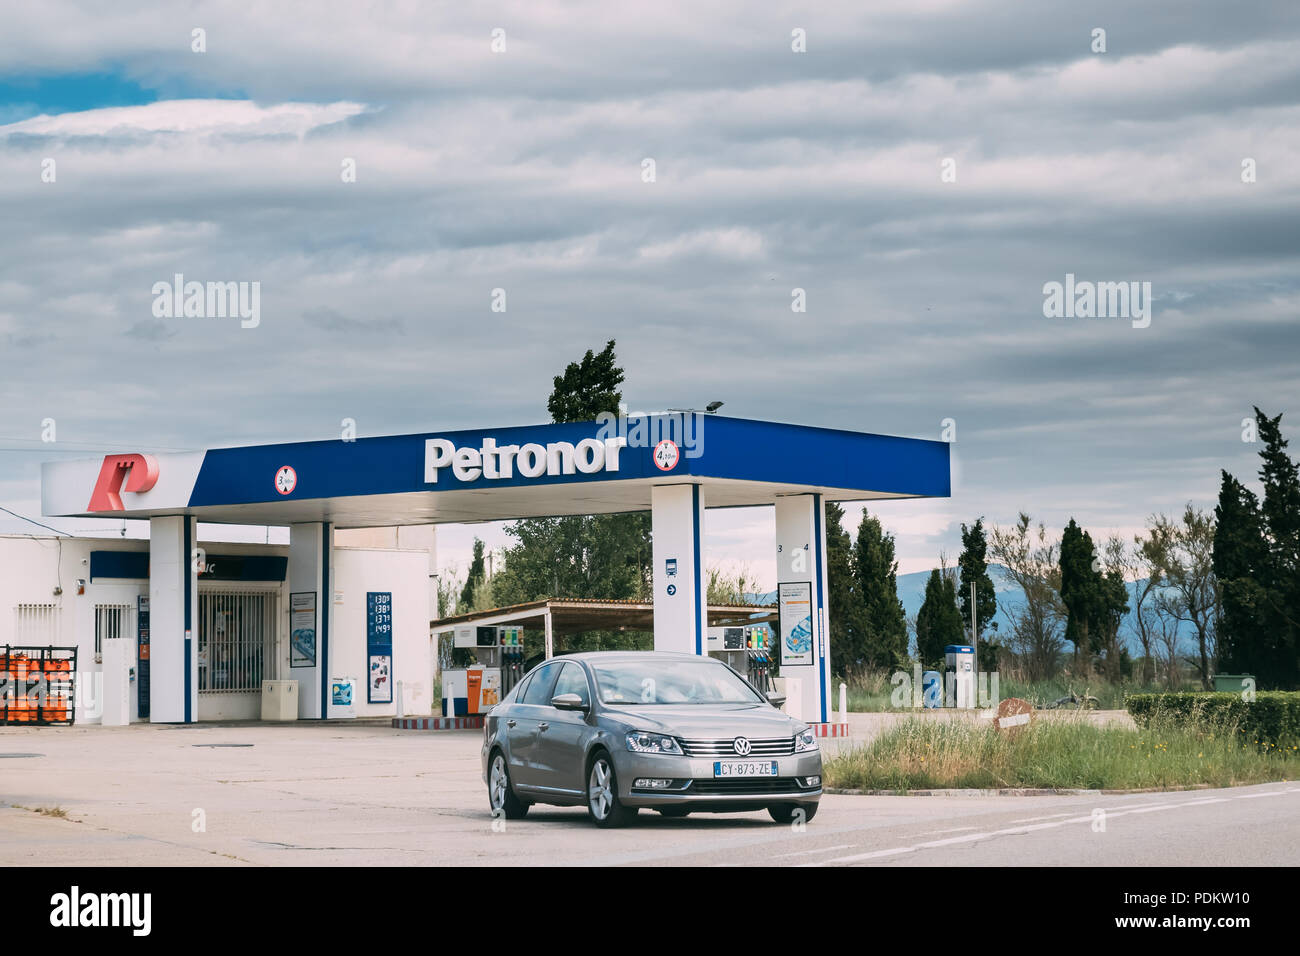 Girona, Catalonia, Spain - May 14, 2018: Volkswagen Car Leaves Oil And Gas Filling Station Petronor. Stock Photo